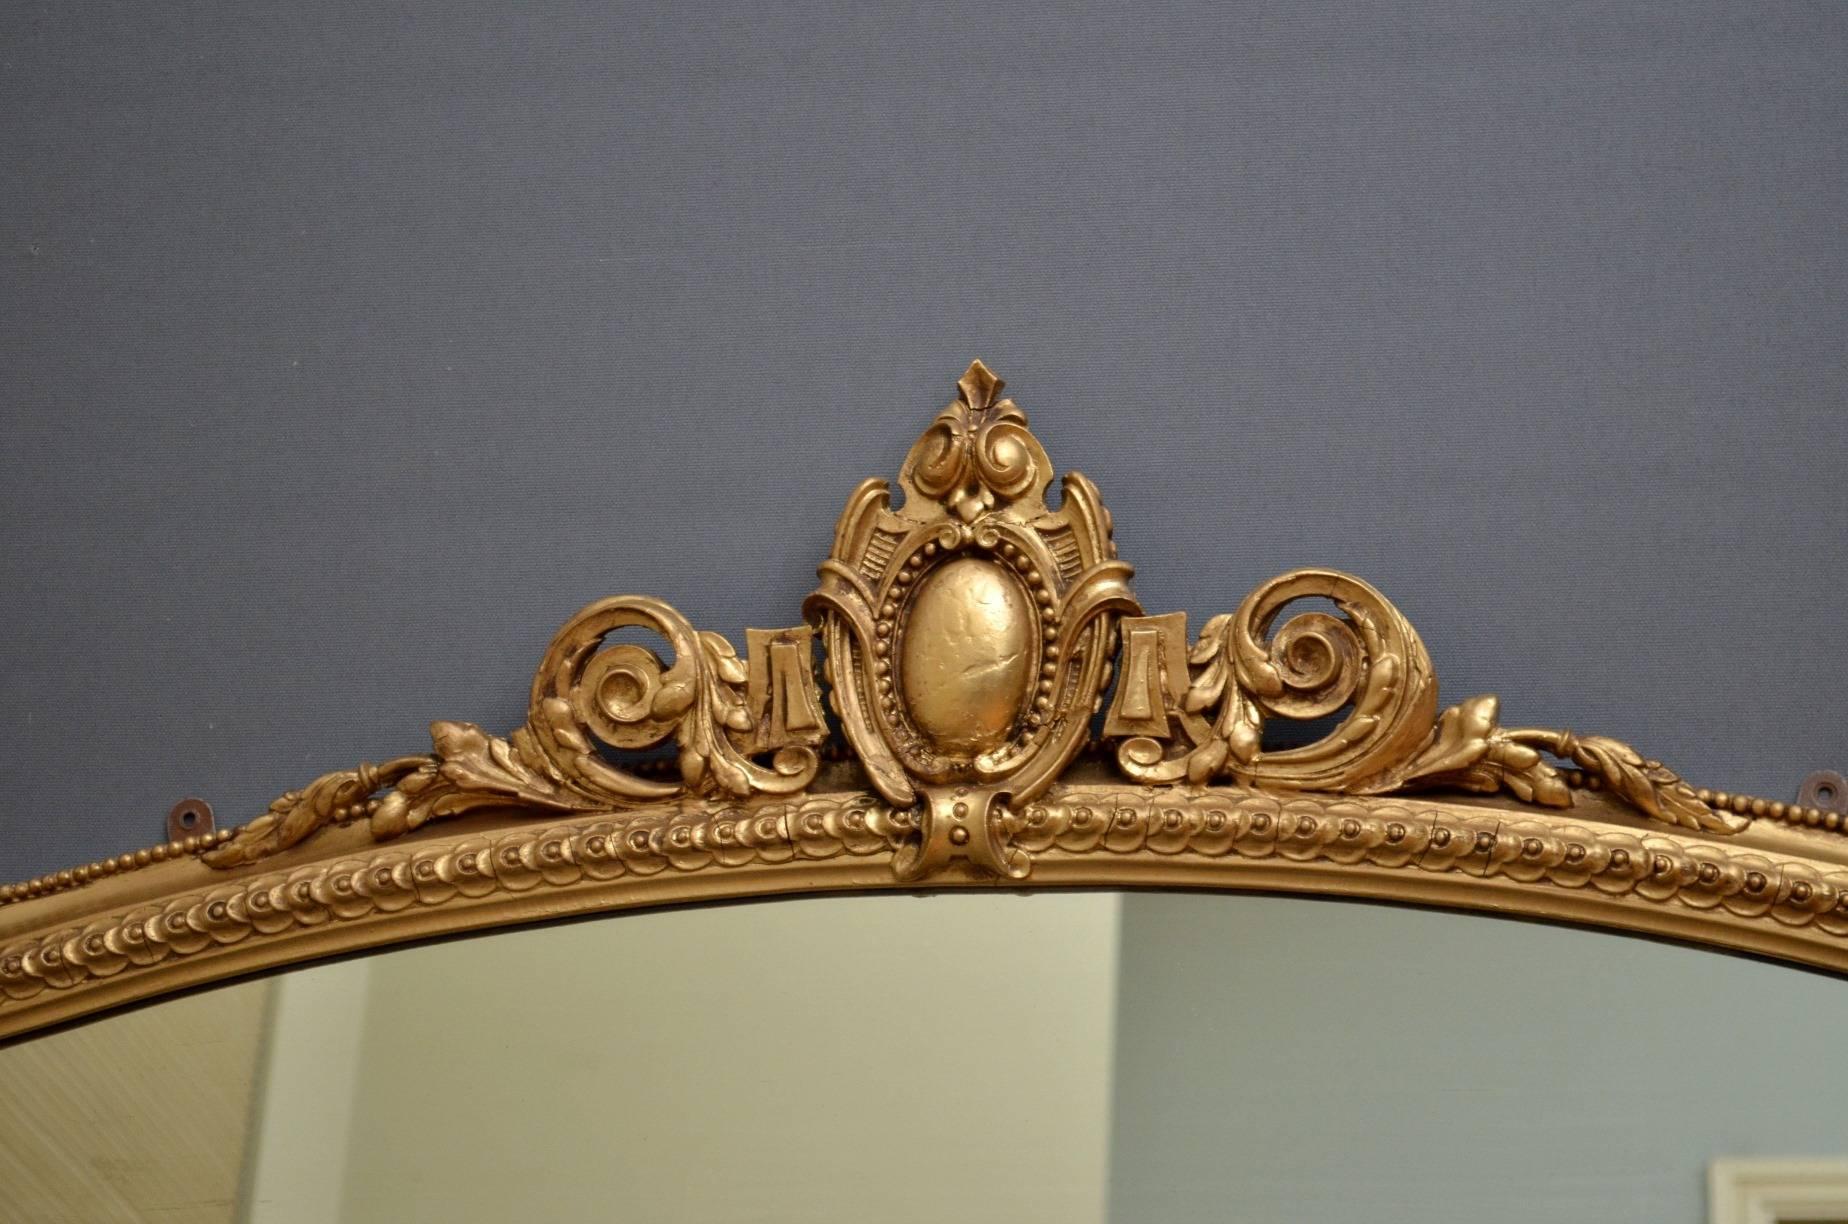 K0217, an elegant Victorian gilt mirror with cartouche shaped cresting to centre, beaded and carved border with Fine scrolls and original mirror plate with some foxing and marks commensurate with age. This attractive mirror has been refinished and